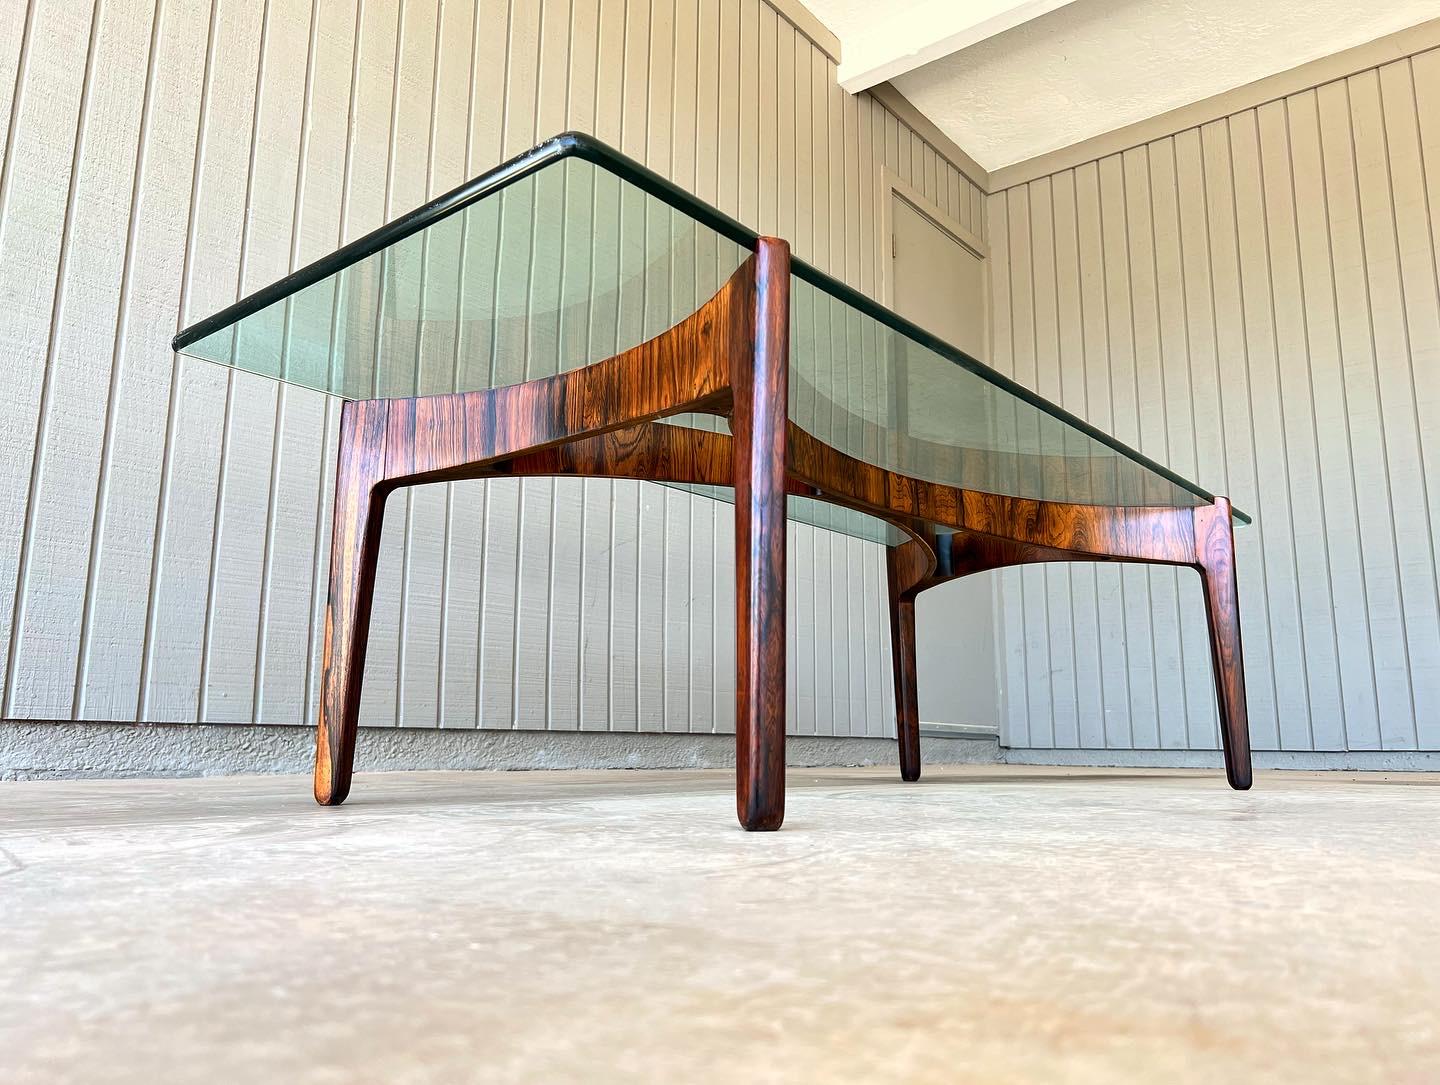 Rosewood base with a glass top mid century modern coffee table designed by Sven Ellekaer for Christian Linneberg Møbelfabrik in the early 1960s in Denmark. The sculptural wood base was already in great condition but has been professionally